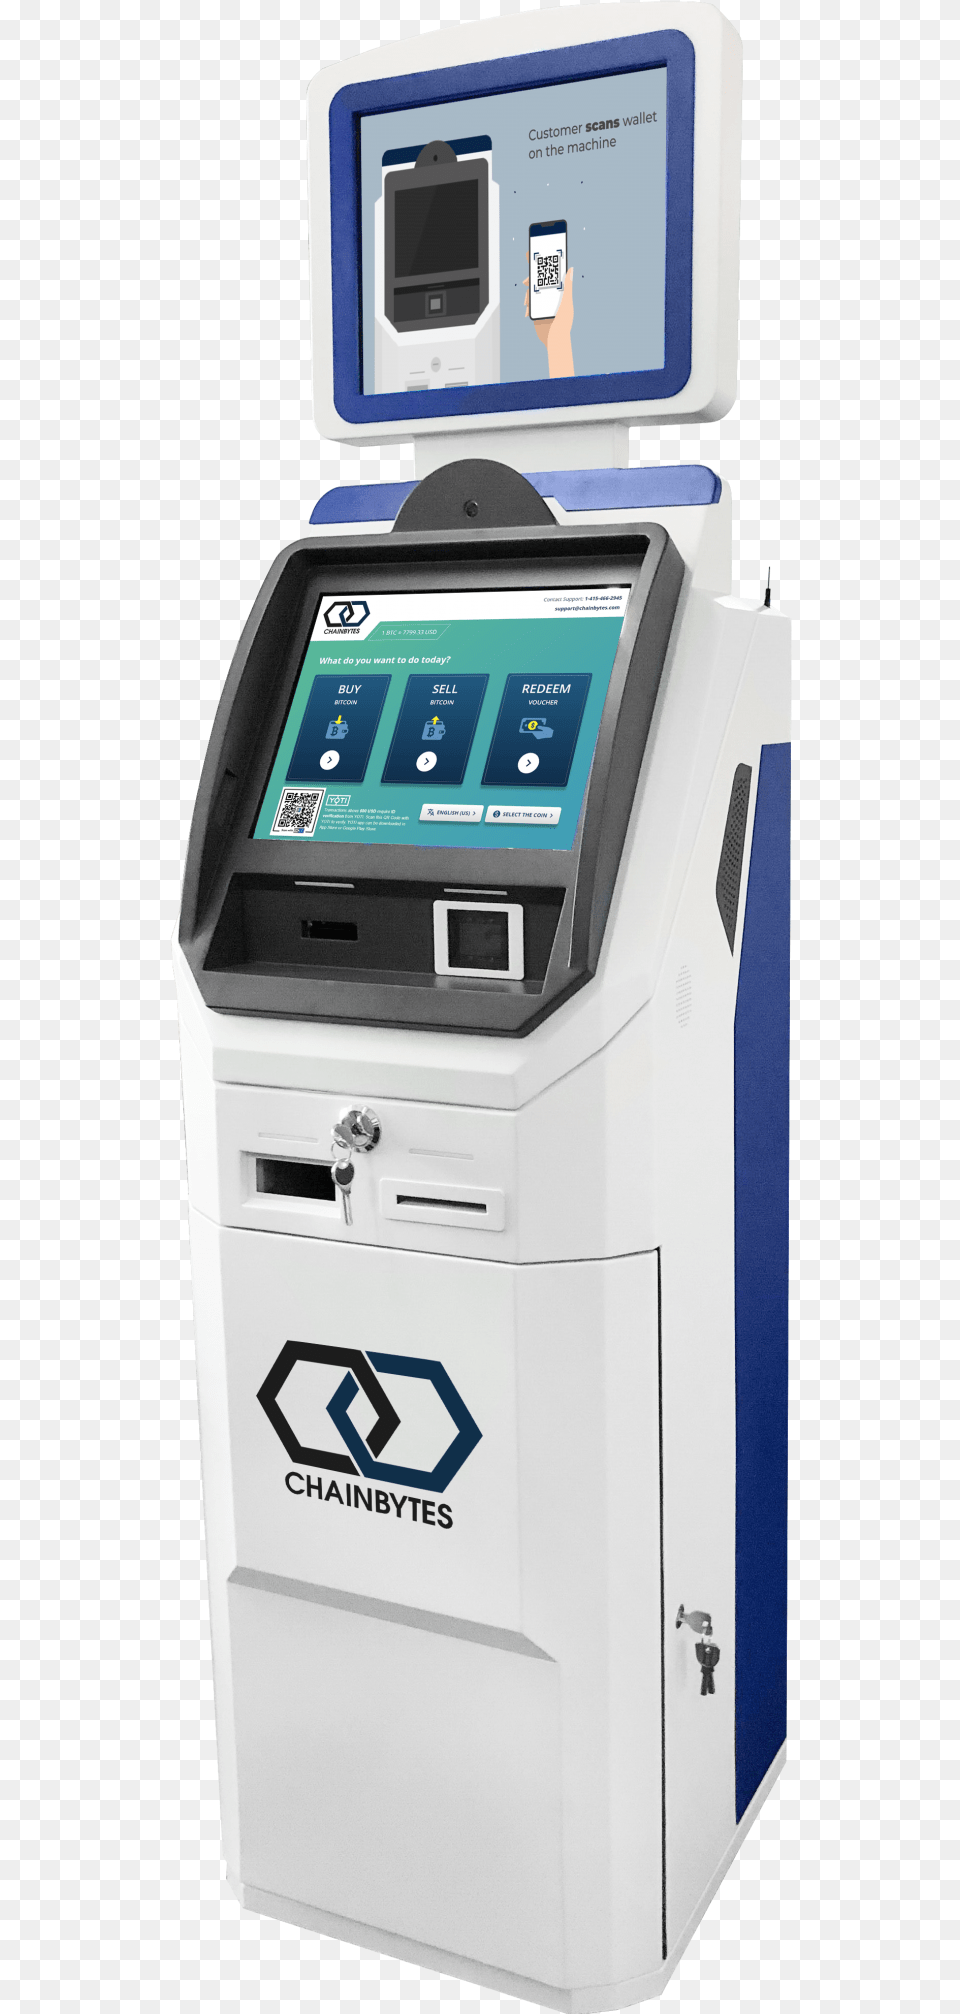 Bitcoin Atm With 2 Screens By Chainbytes Atm Machine Alarm, Kiosk, Computer Hardware, Electronics, Hardware Free Transparent Png